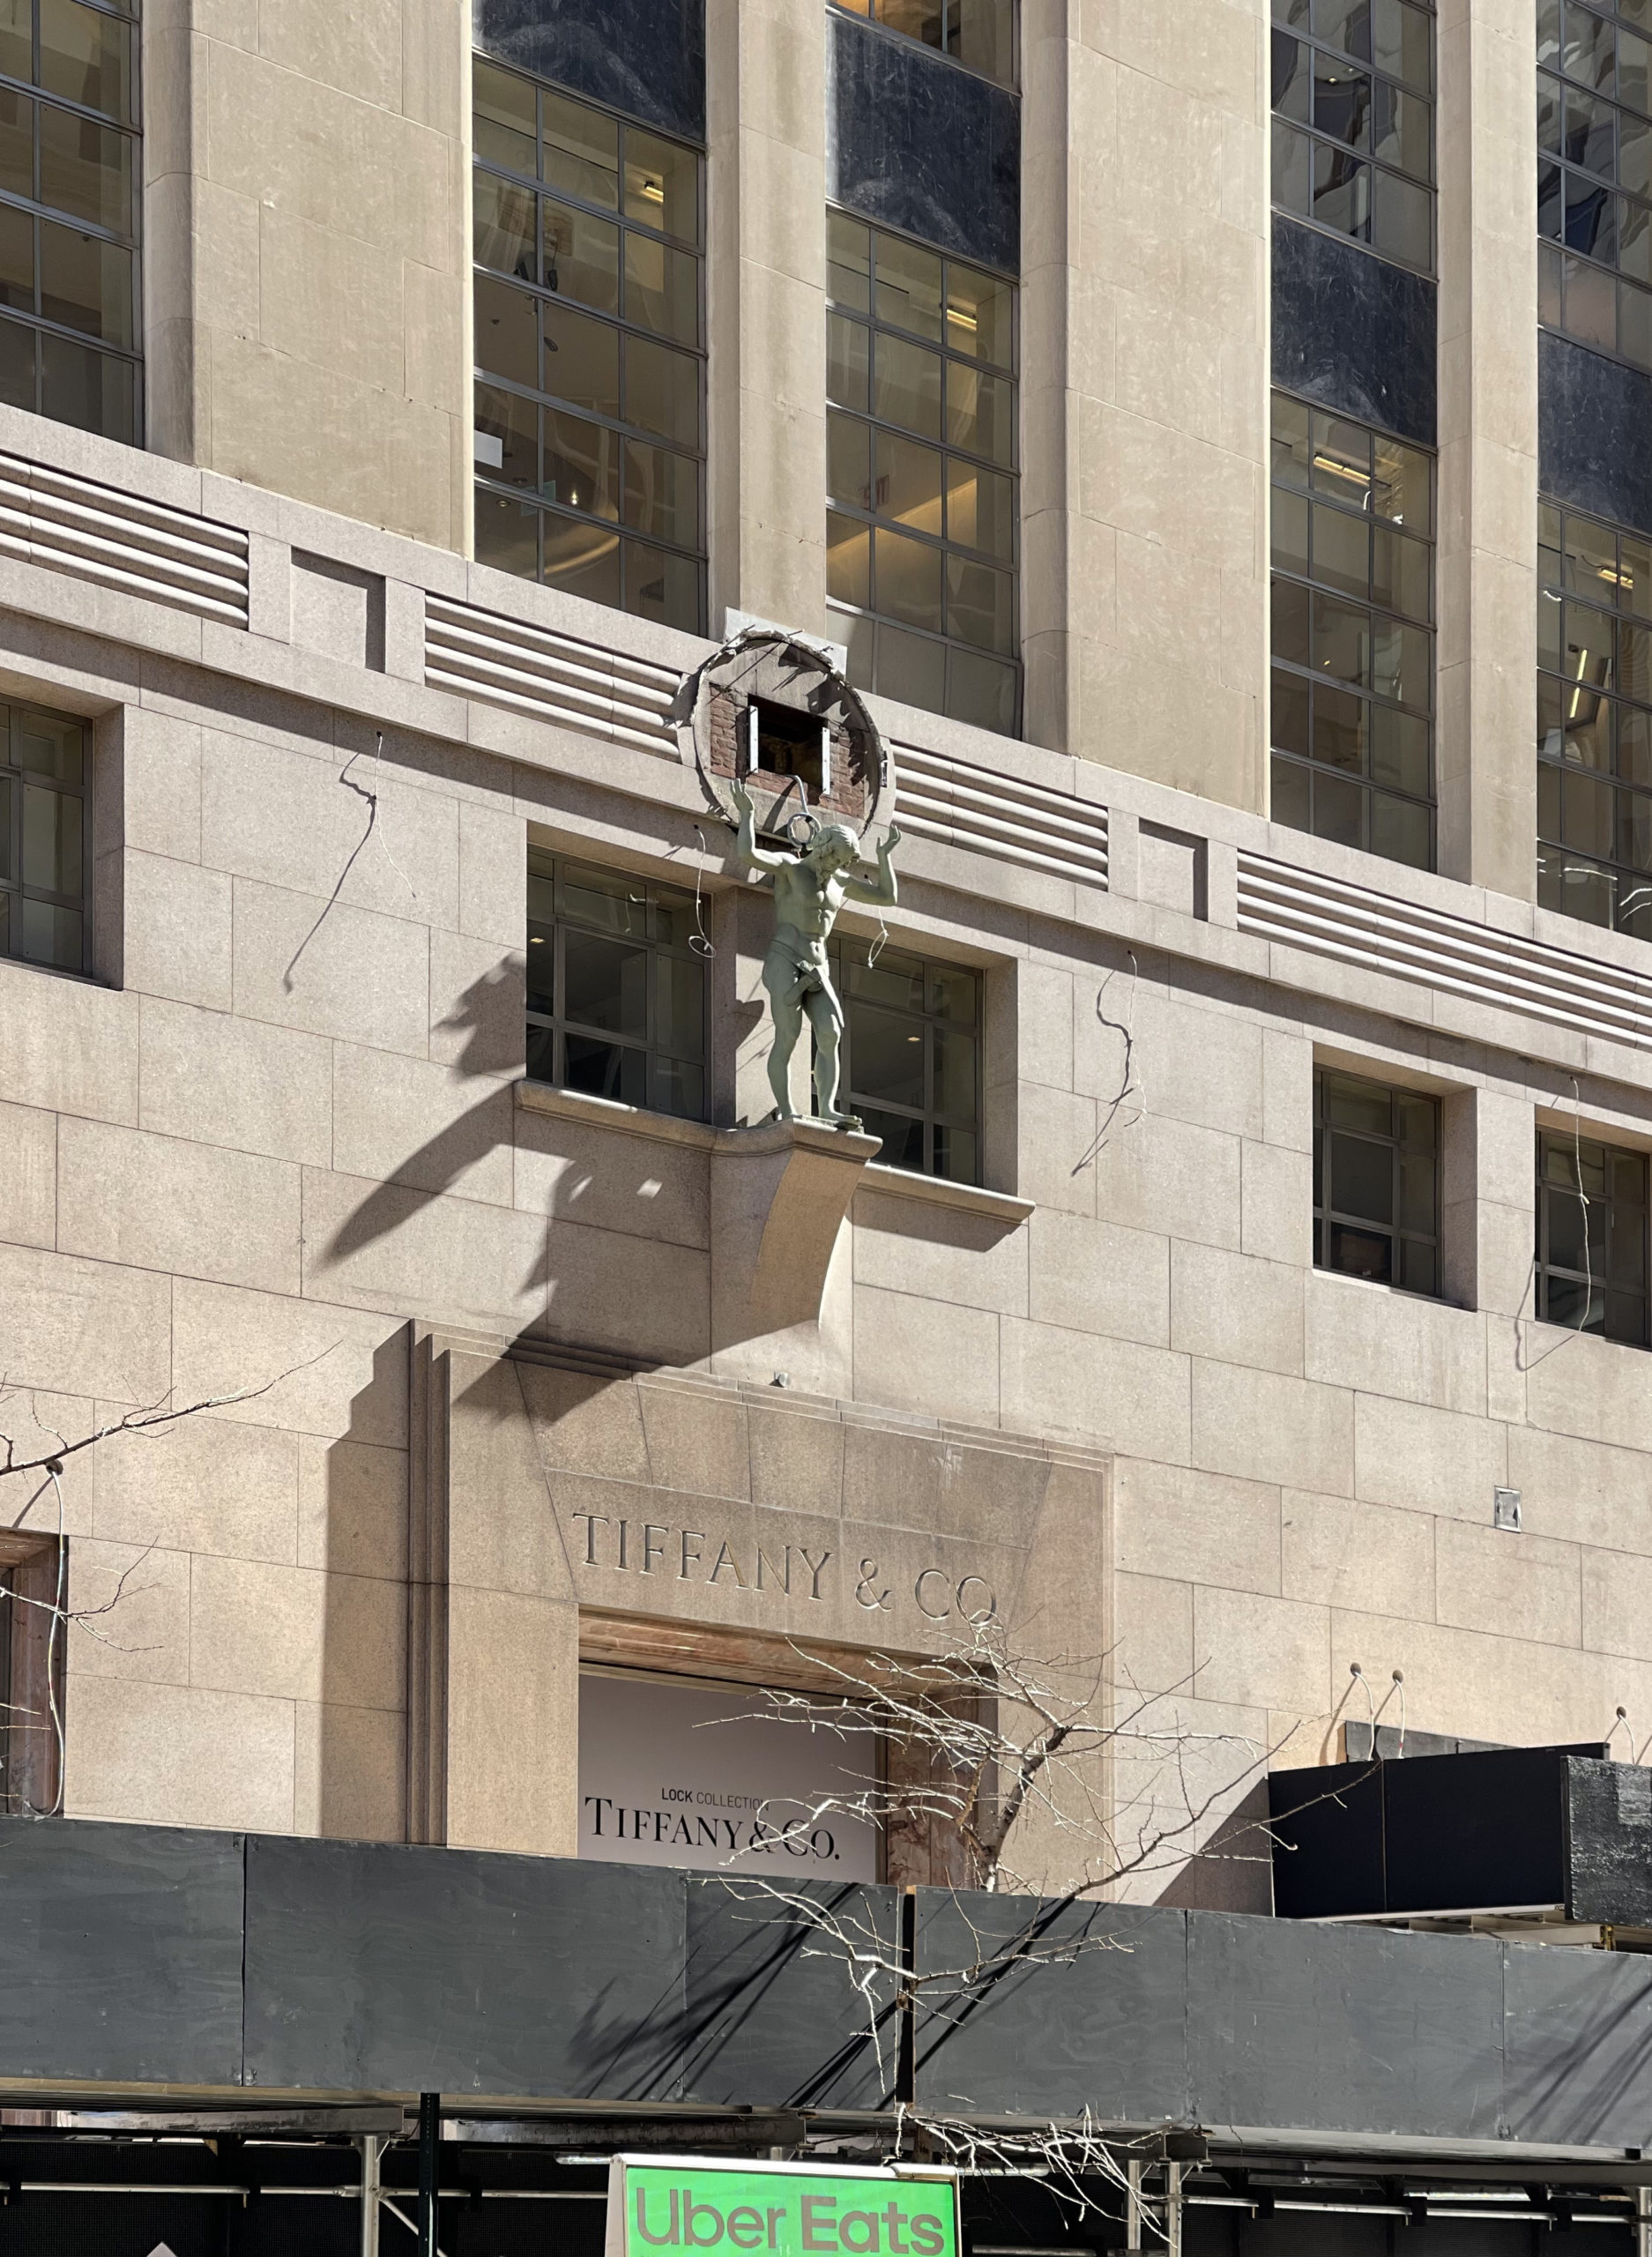 Tiffany & Co. extends lease in Flatiron District